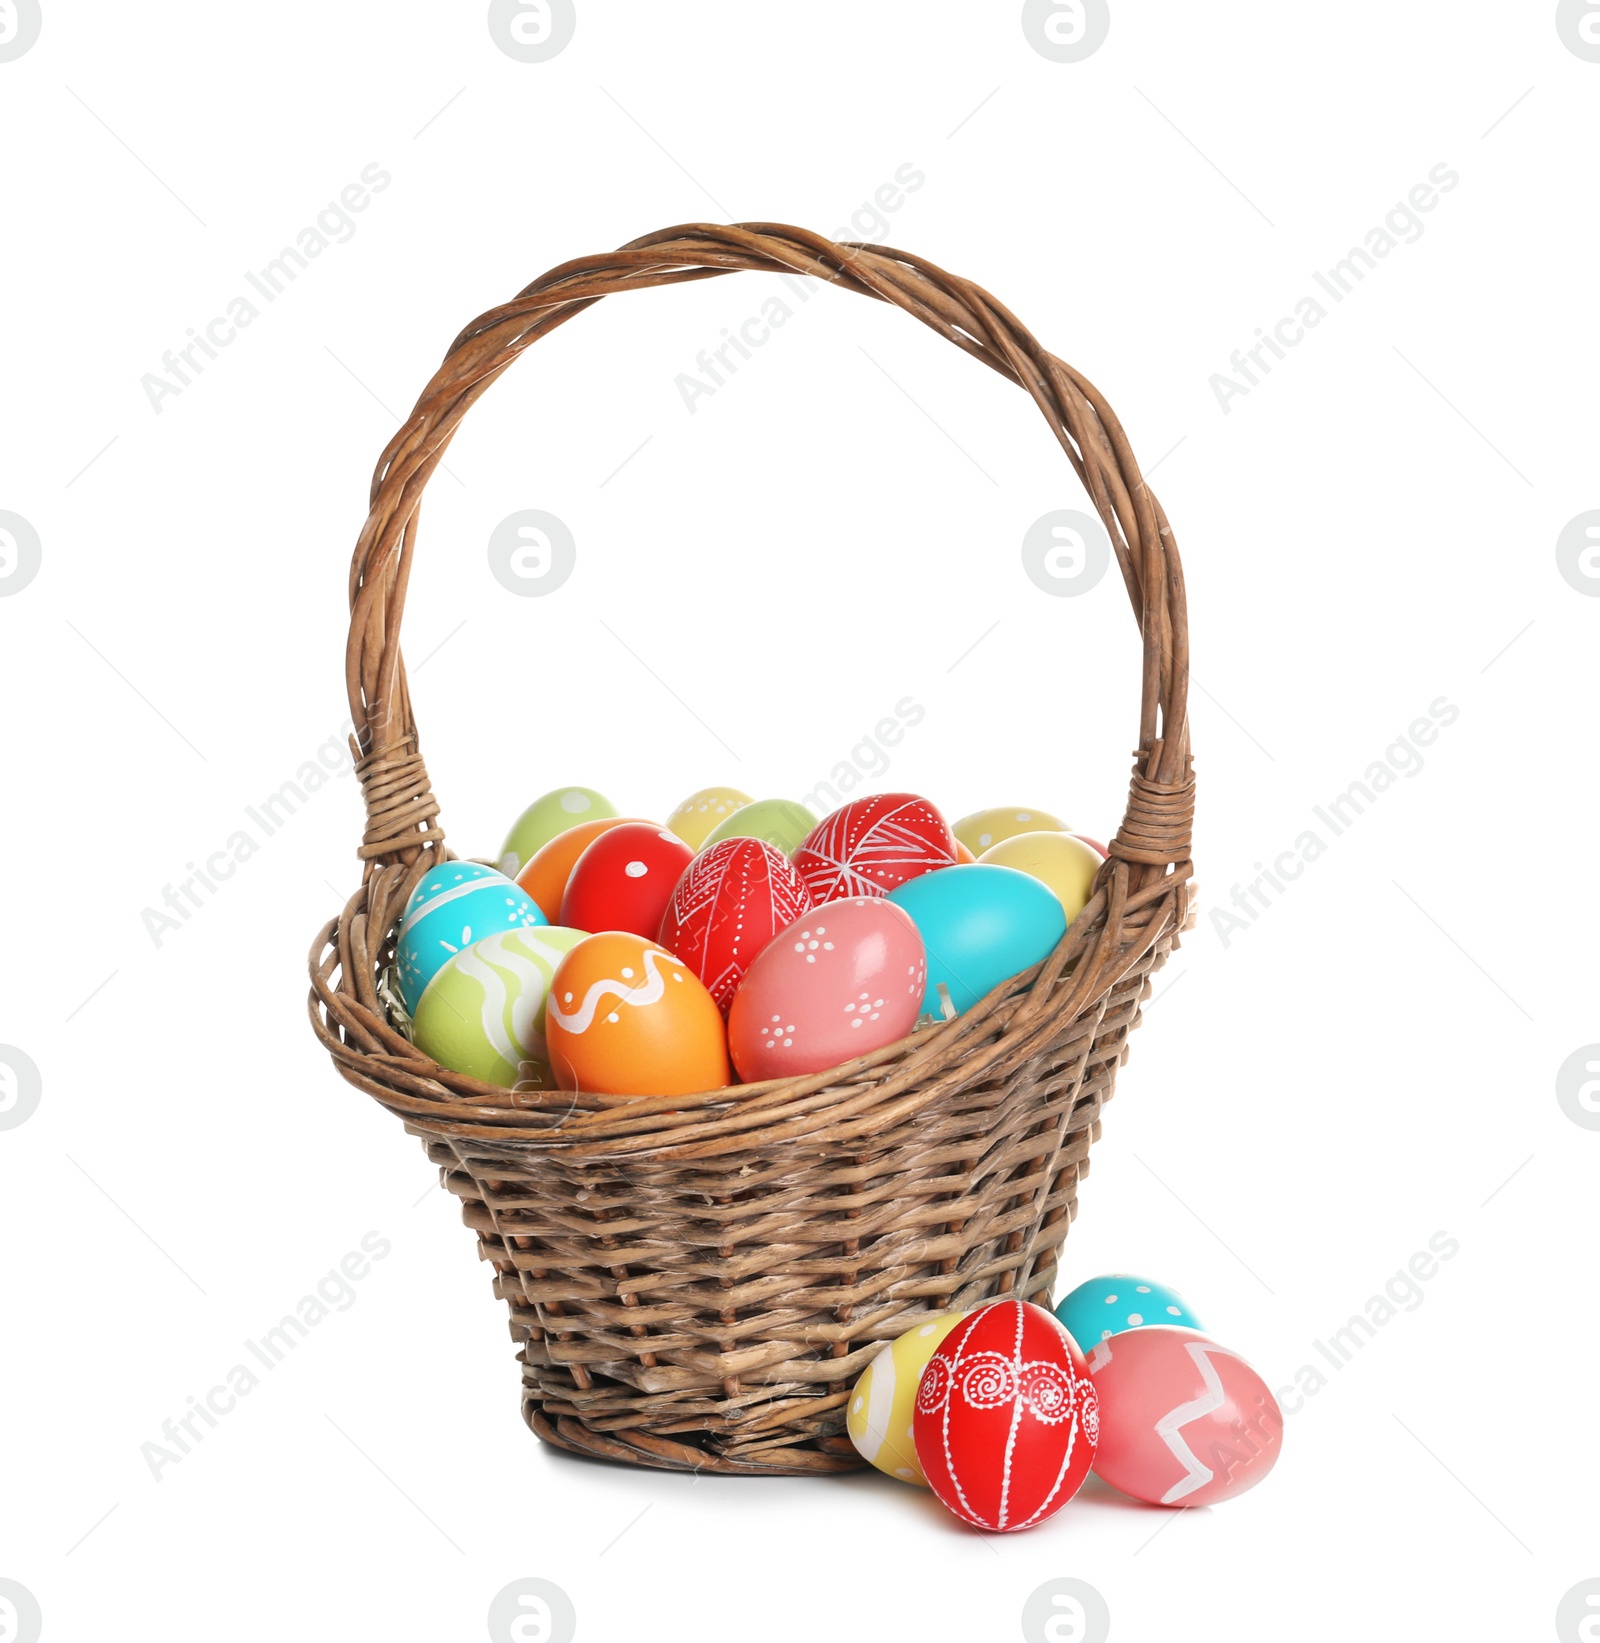 Photo of Wicker basket with painted Easter eggs on white background